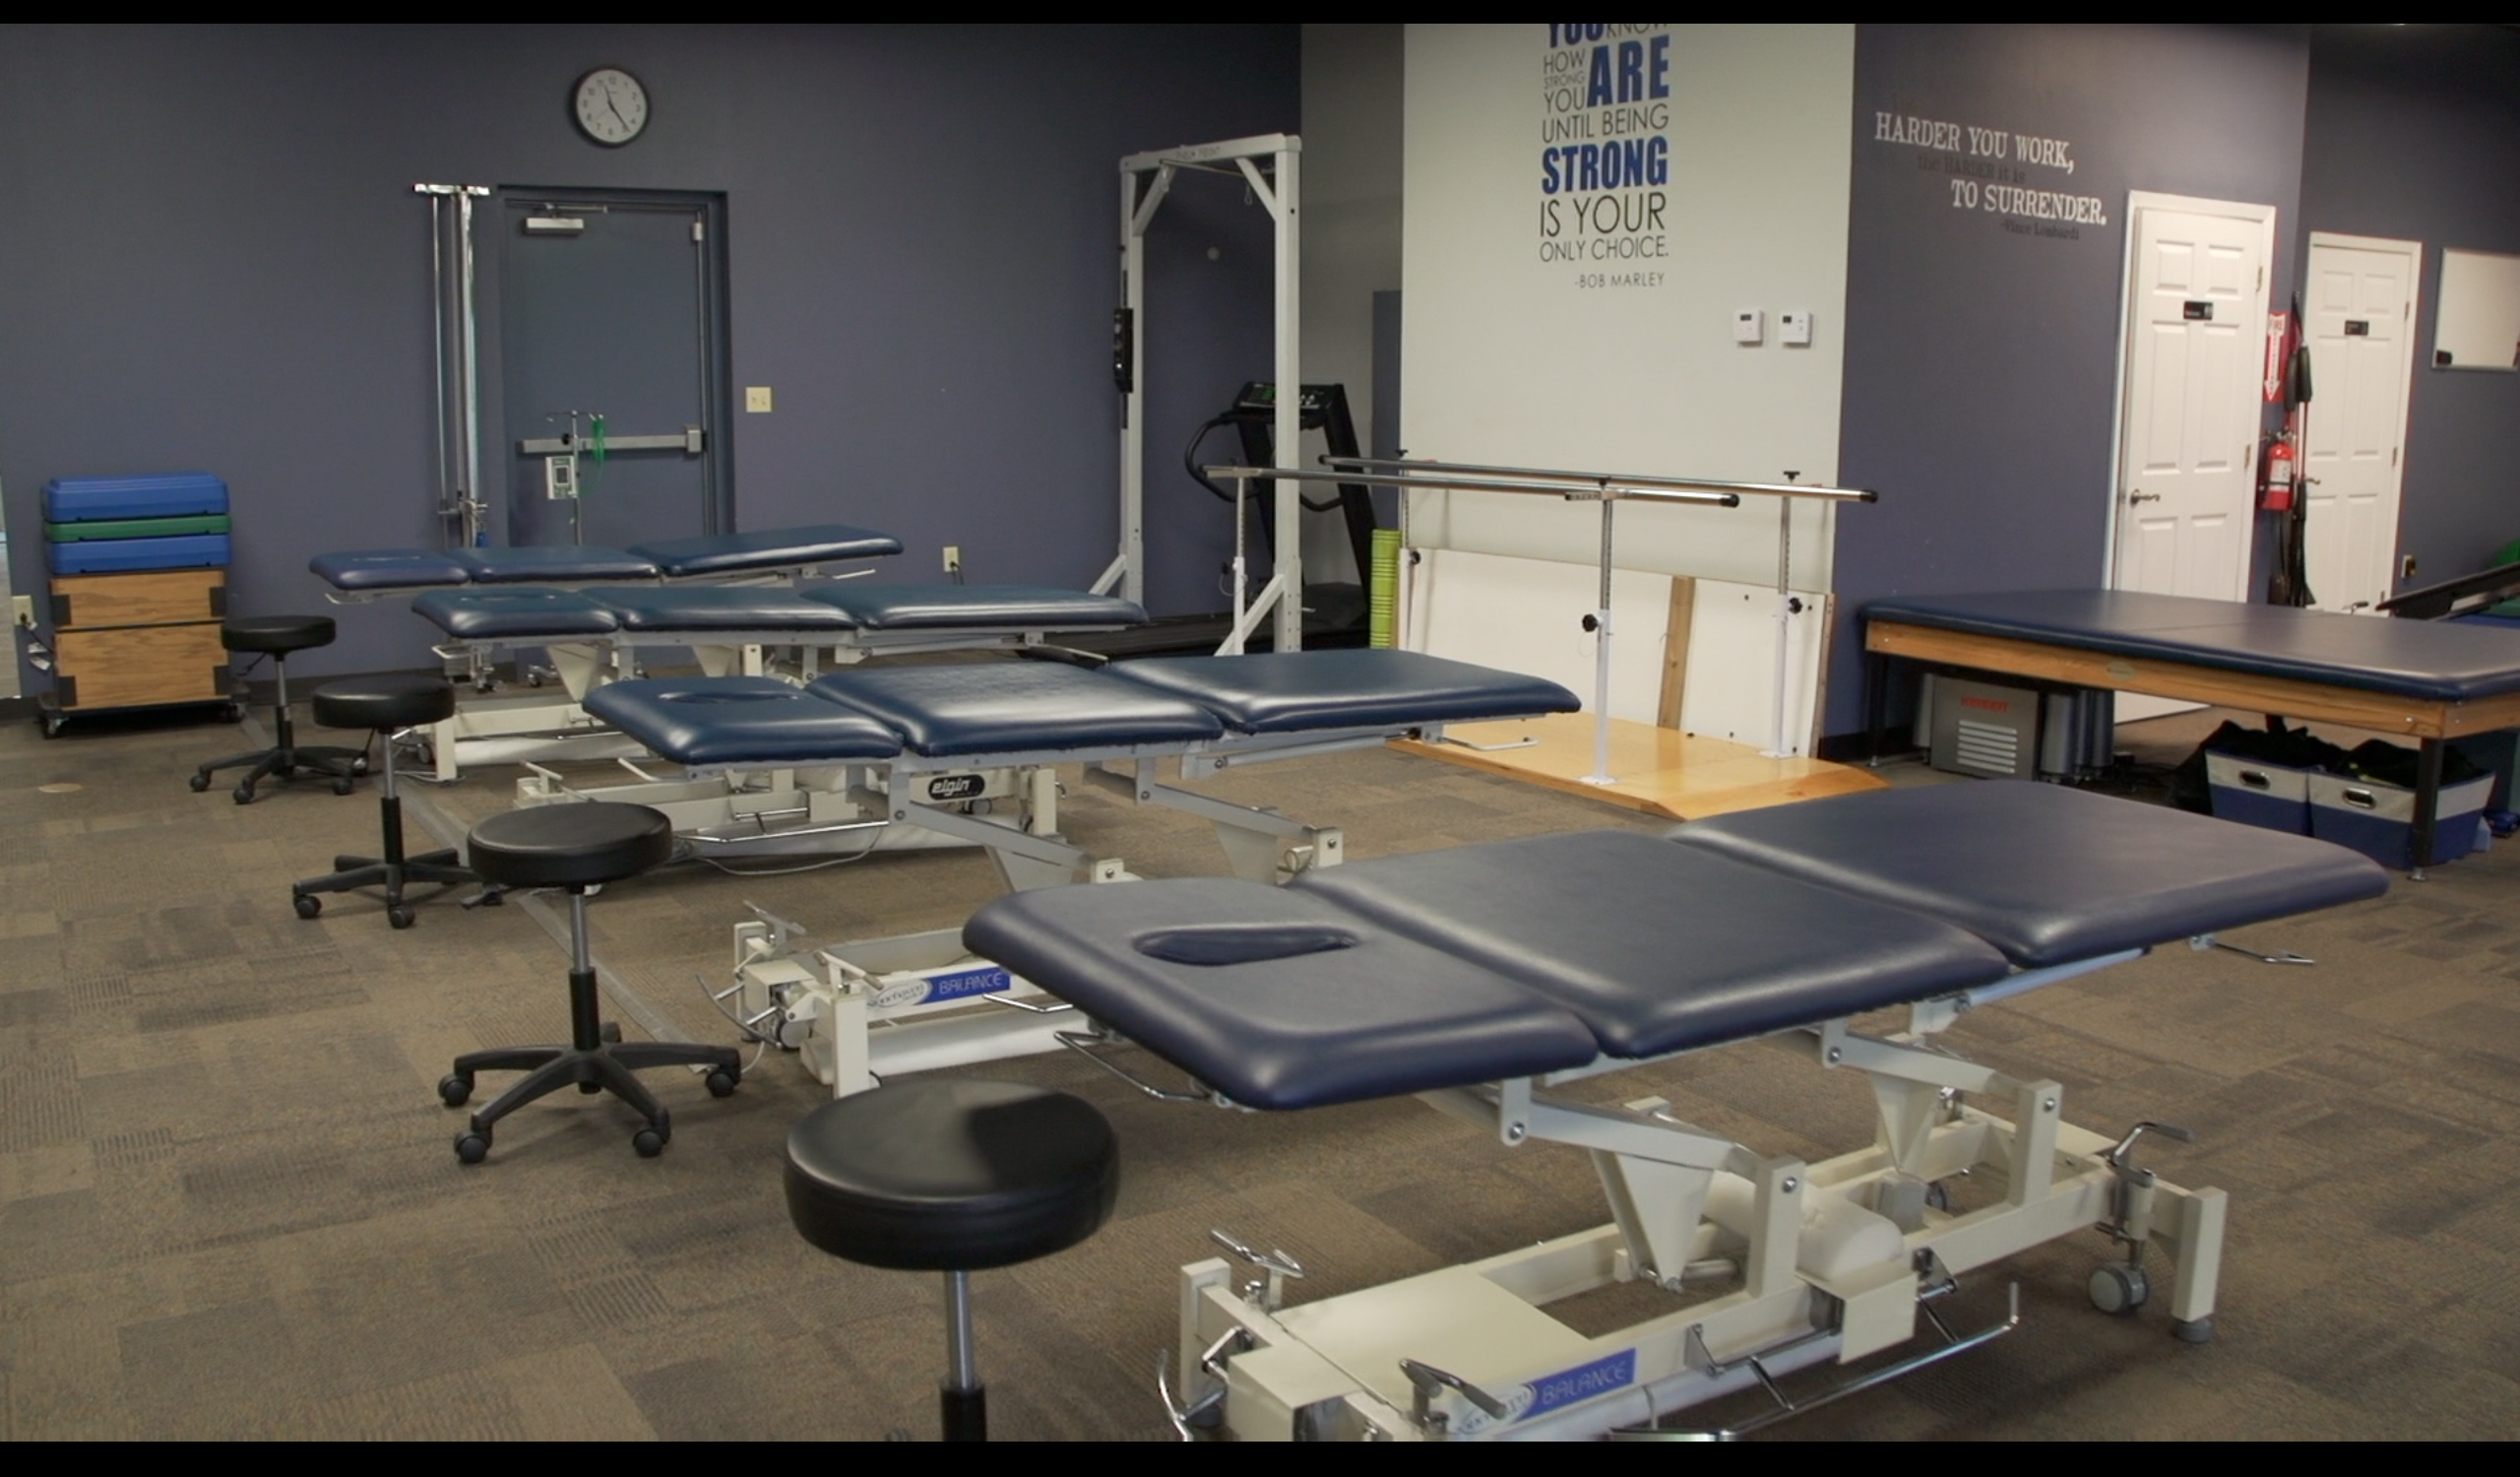 Boerne Physical Therapy